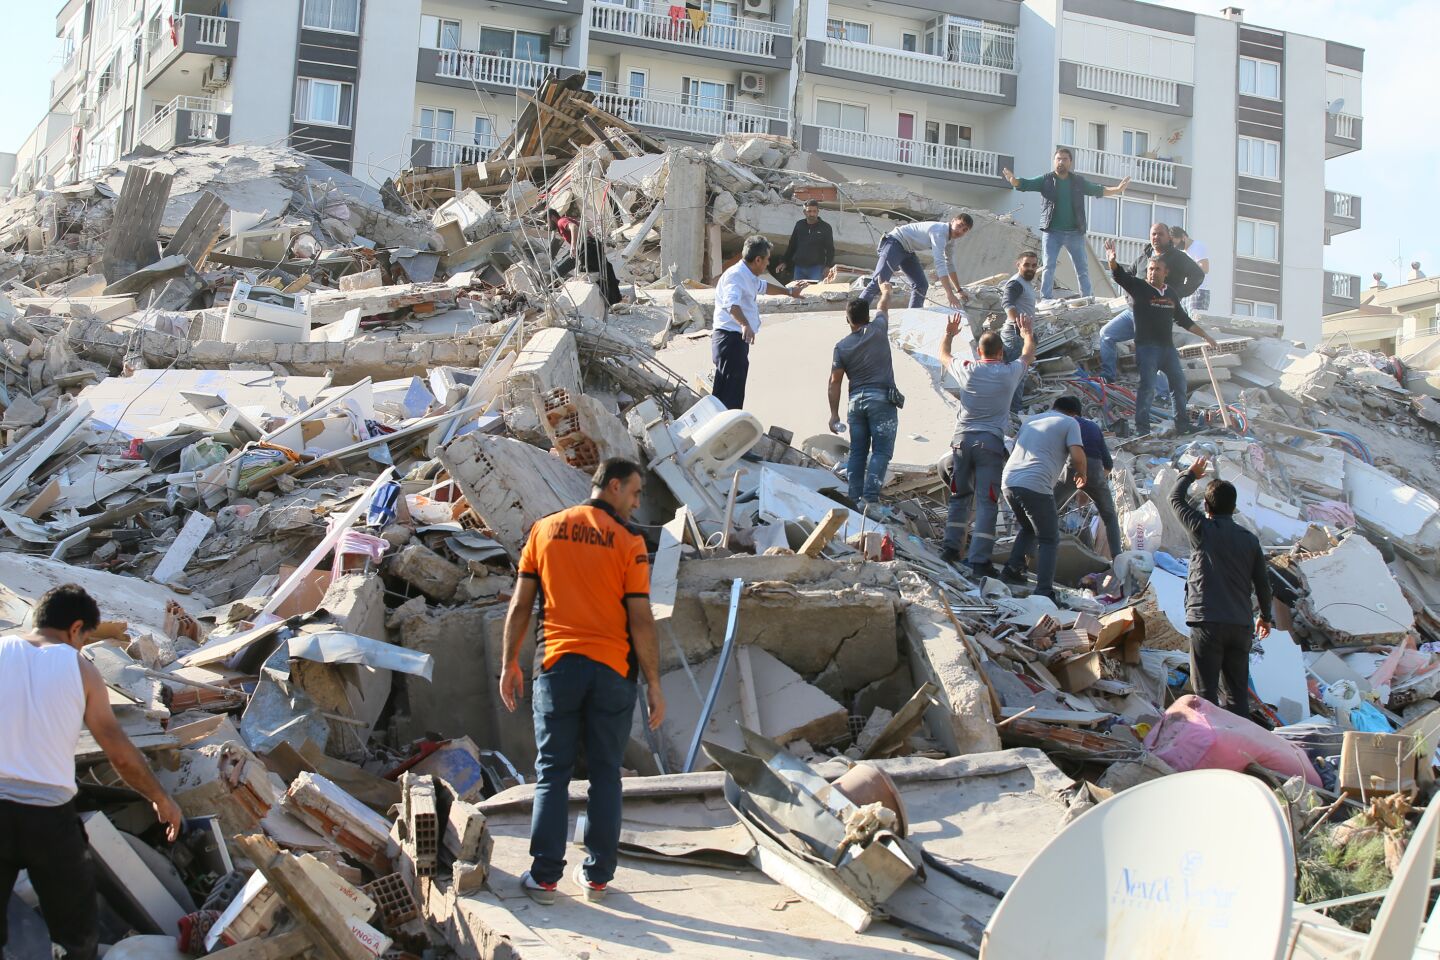 IZMIR, TURKEY - OCTOBER 30: Search and rescue works are being conducted at debris of a building in Bayrakli district of Izmir after a magnitude 6.6 quake shook Turkey's Aegean Sea coast, in Izmir, Turkey on October 30, 2020. (Photo by Mehmet Emin Menguarslan/Anadolu Agency via Getty Images)